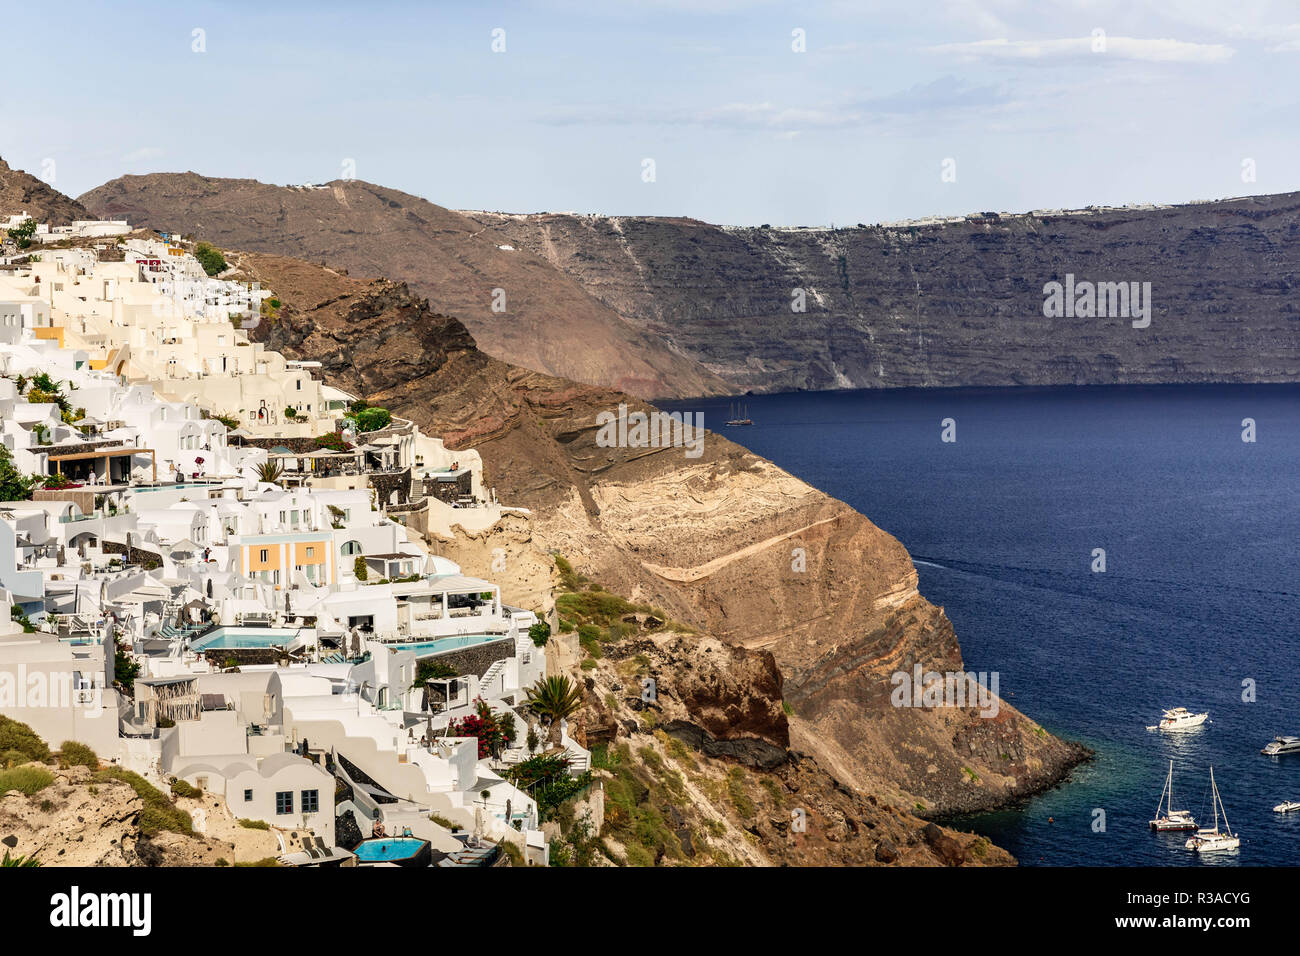 The Santorini caldera measures about 12 by 7 km (7.5 by 4.3 mi), with 300 m (980 ft) high steep cliffs on three sides. Santorini has an area of 75.8 k Stock Photo